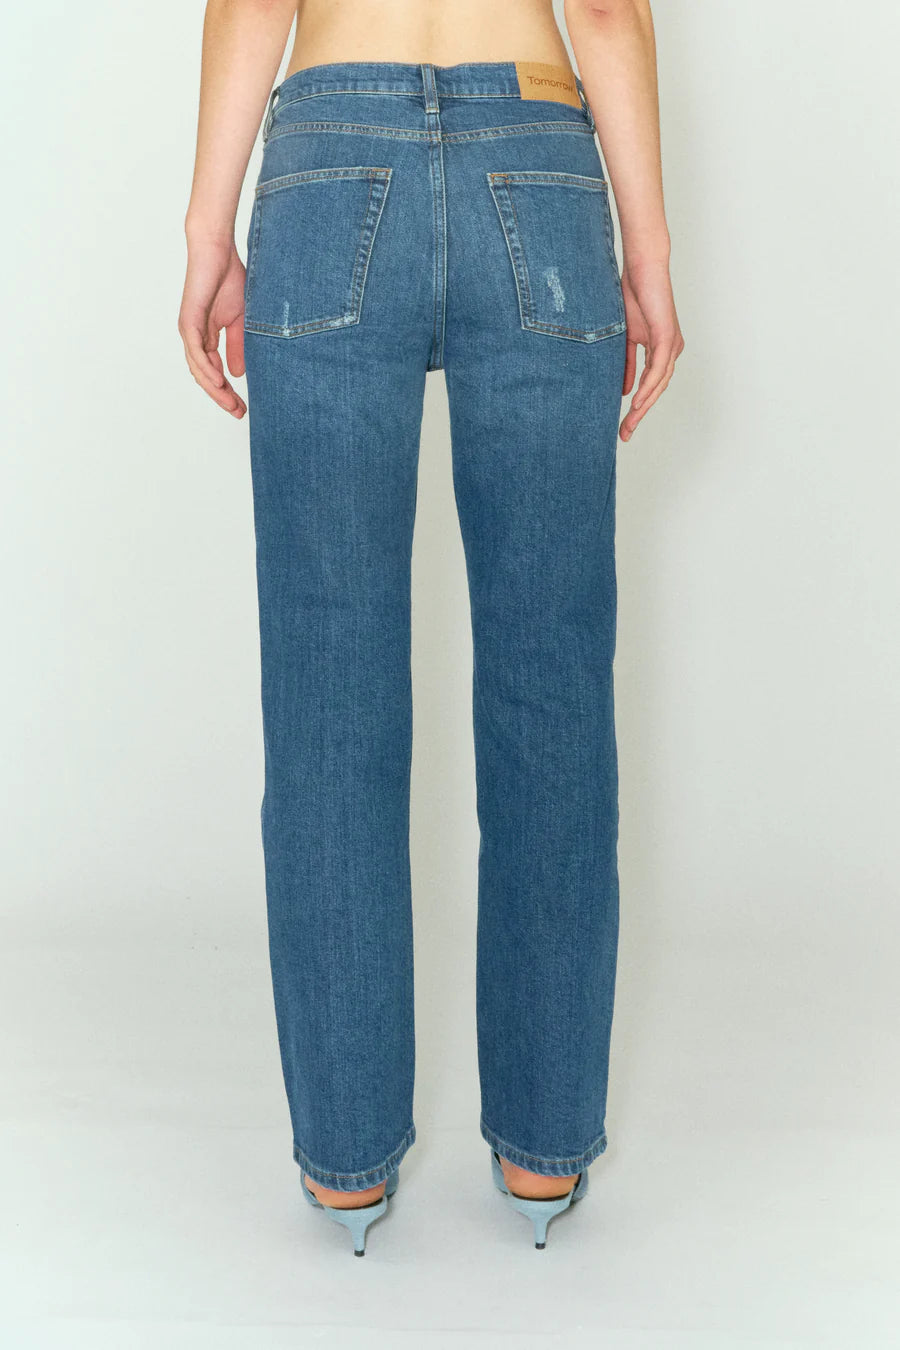 The back view of a woman wearing a pair of Marston Jeans - Key West made from organic cotton by Tomorrow Denim.